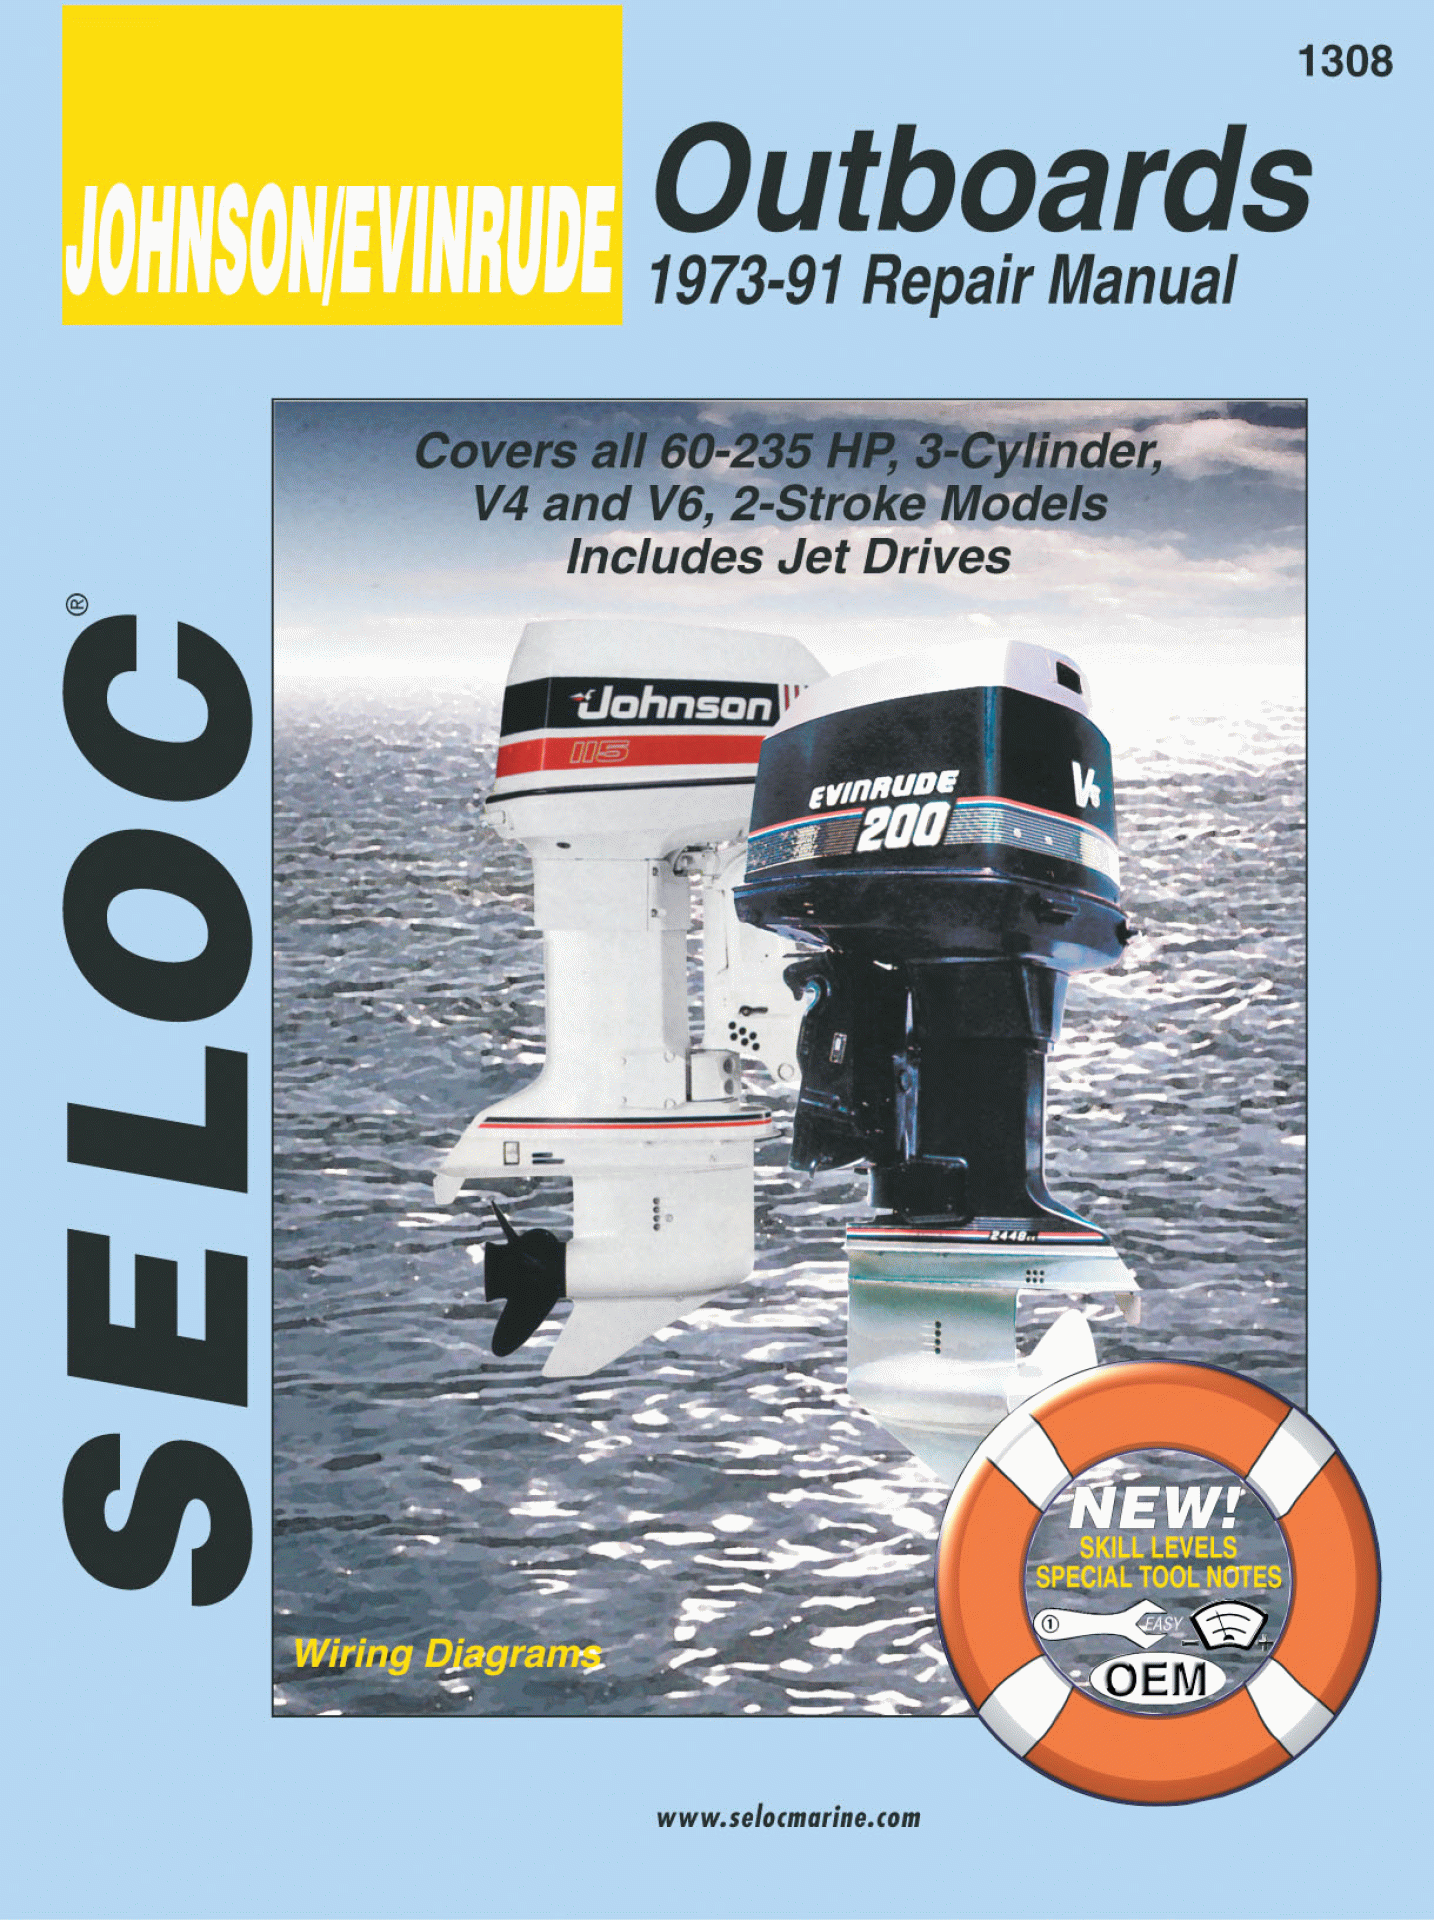 SELOC PUBLISHING | 18-01308 | REPAIR MANUAL Johnson/Evinrude Outboards 3 4 & 6 Cyl 1973-91